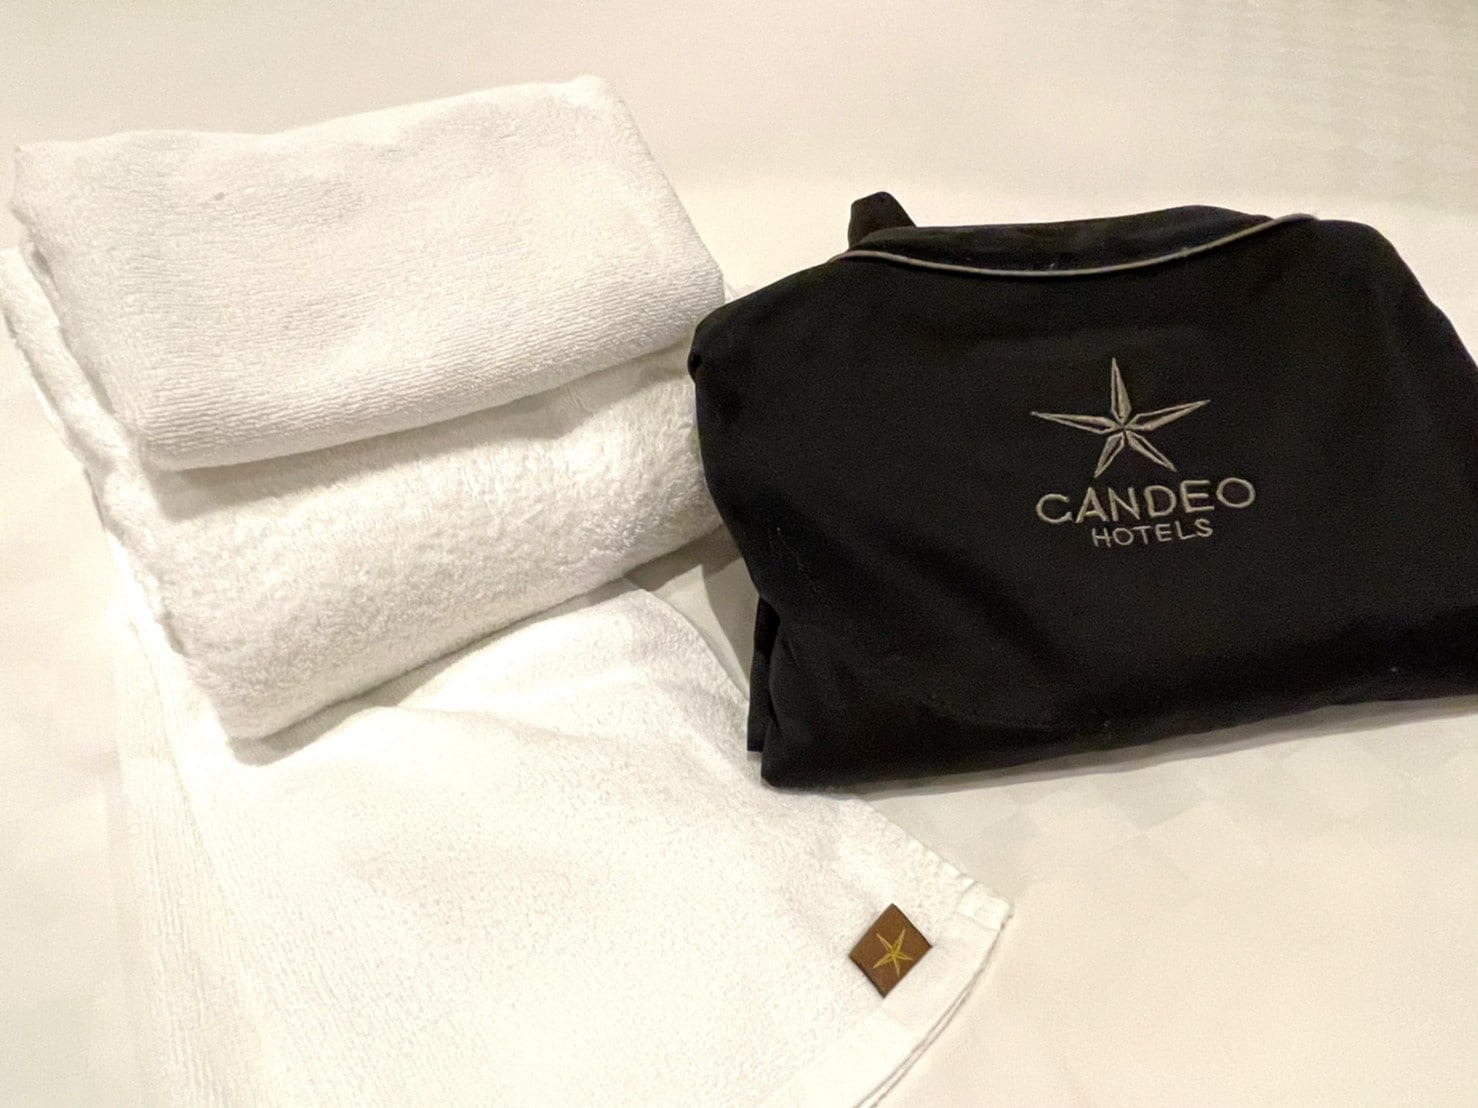 In-house clothes & towel set